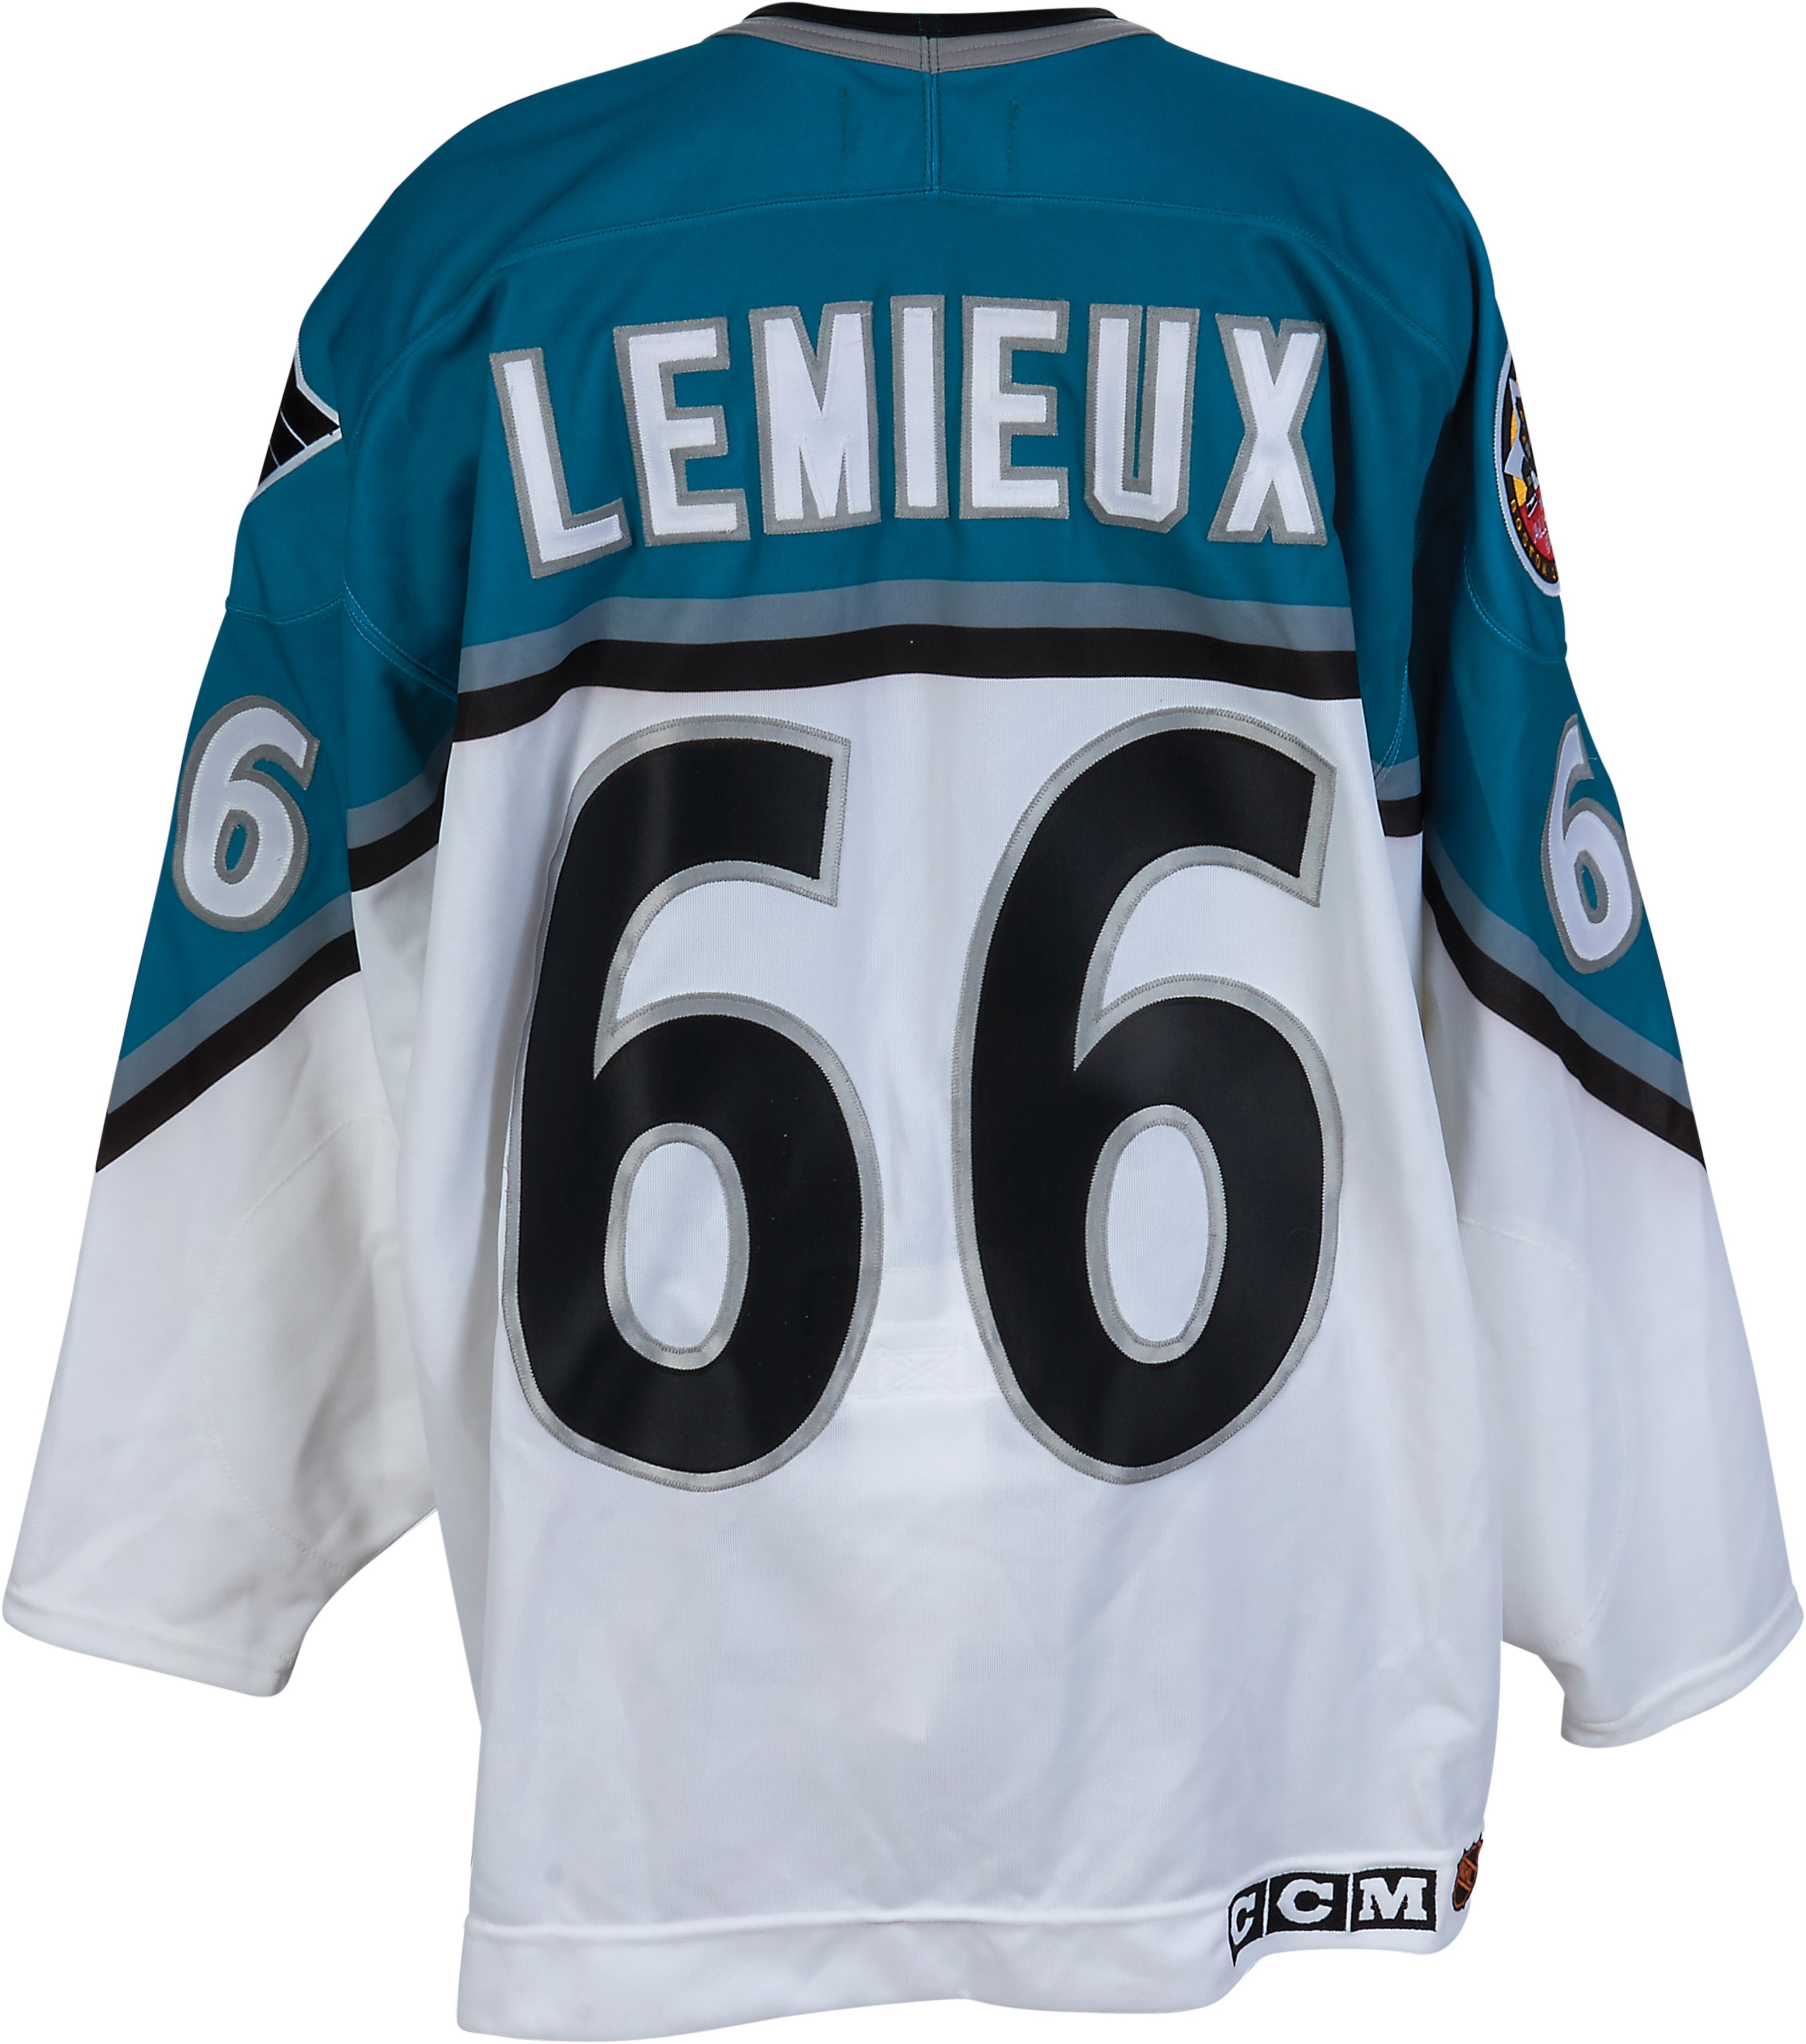 Hockey - 1996 Mario Lemieux NHL All-Star Game Worn Jersey (Photo-Matched)